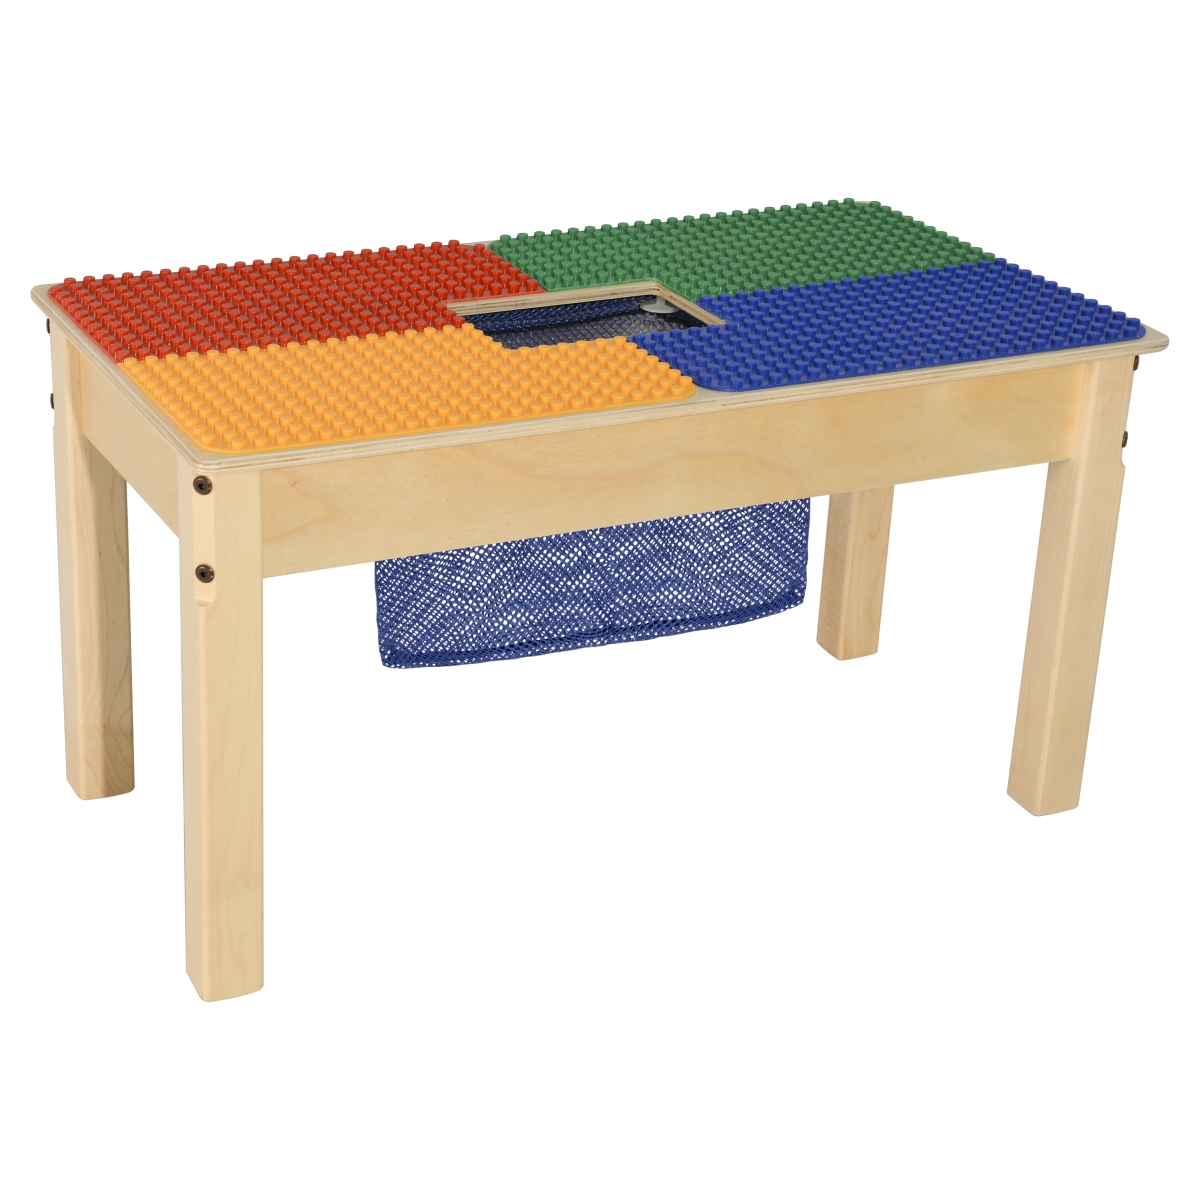 Tp1631pgn18 18 In. Duplo Compatible Rectangle Table With Legs, Multi Color